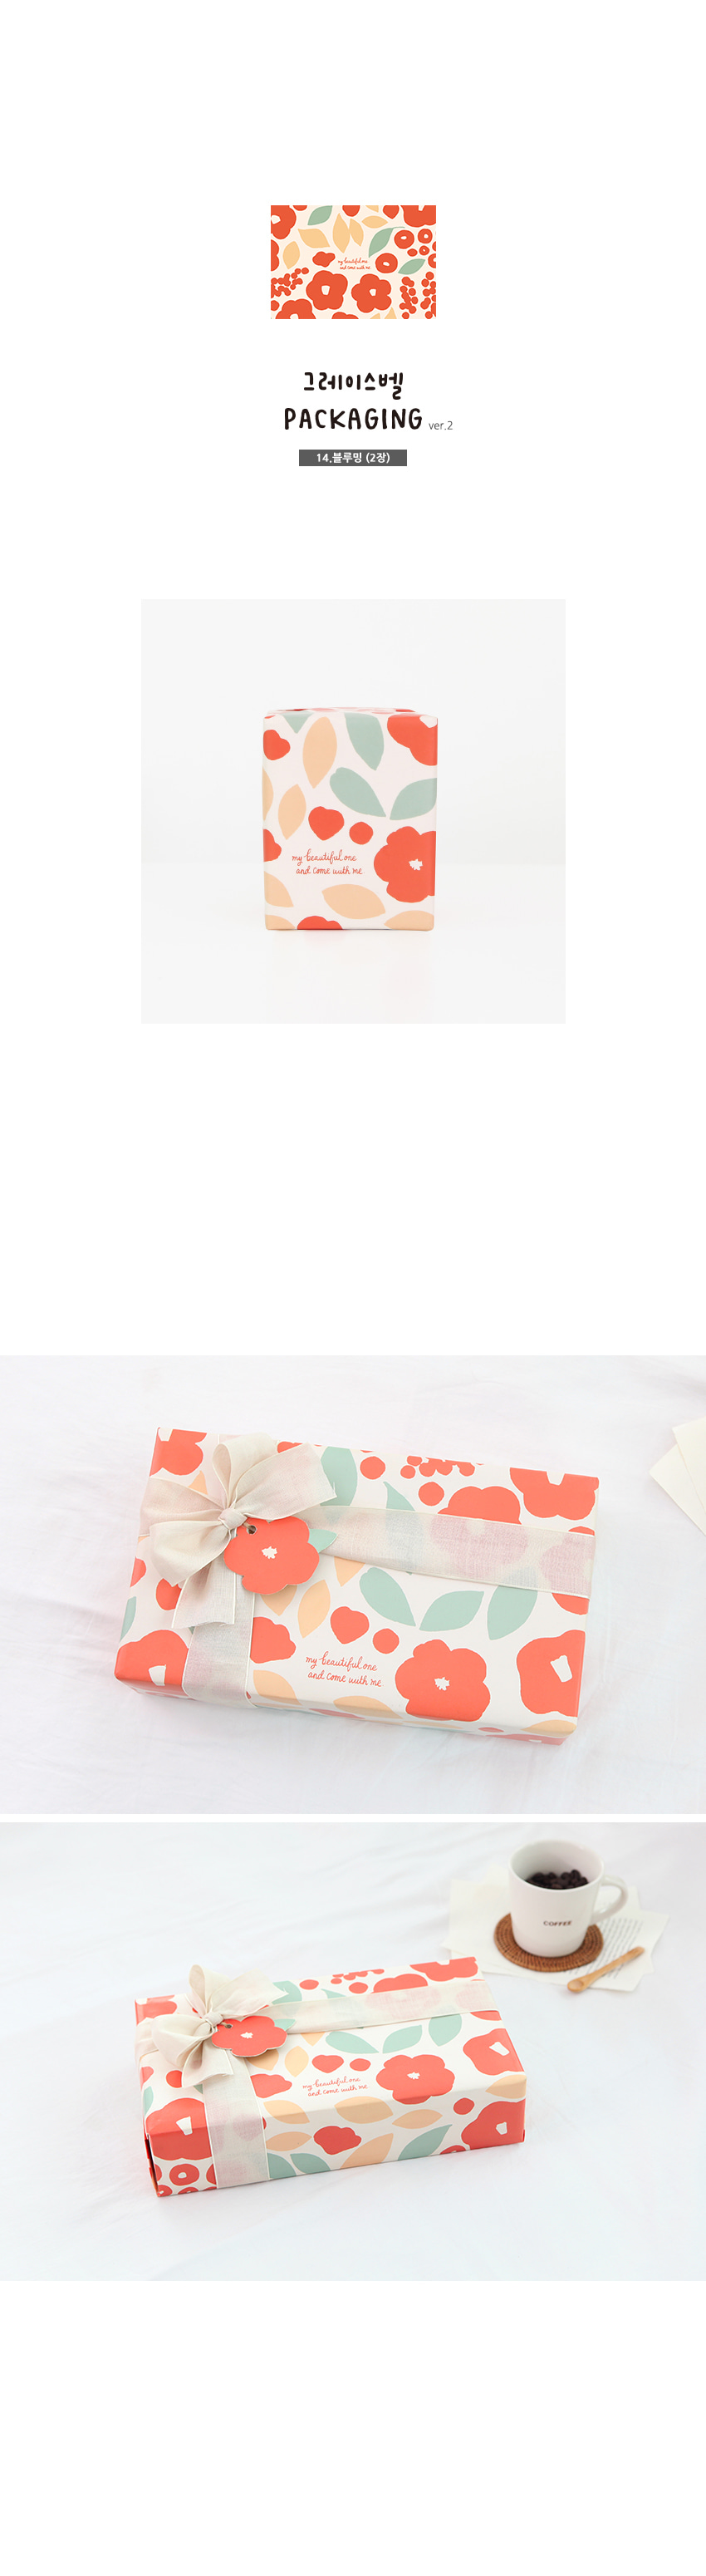 190502_wrapping_paper_ver2-014_01.jpg